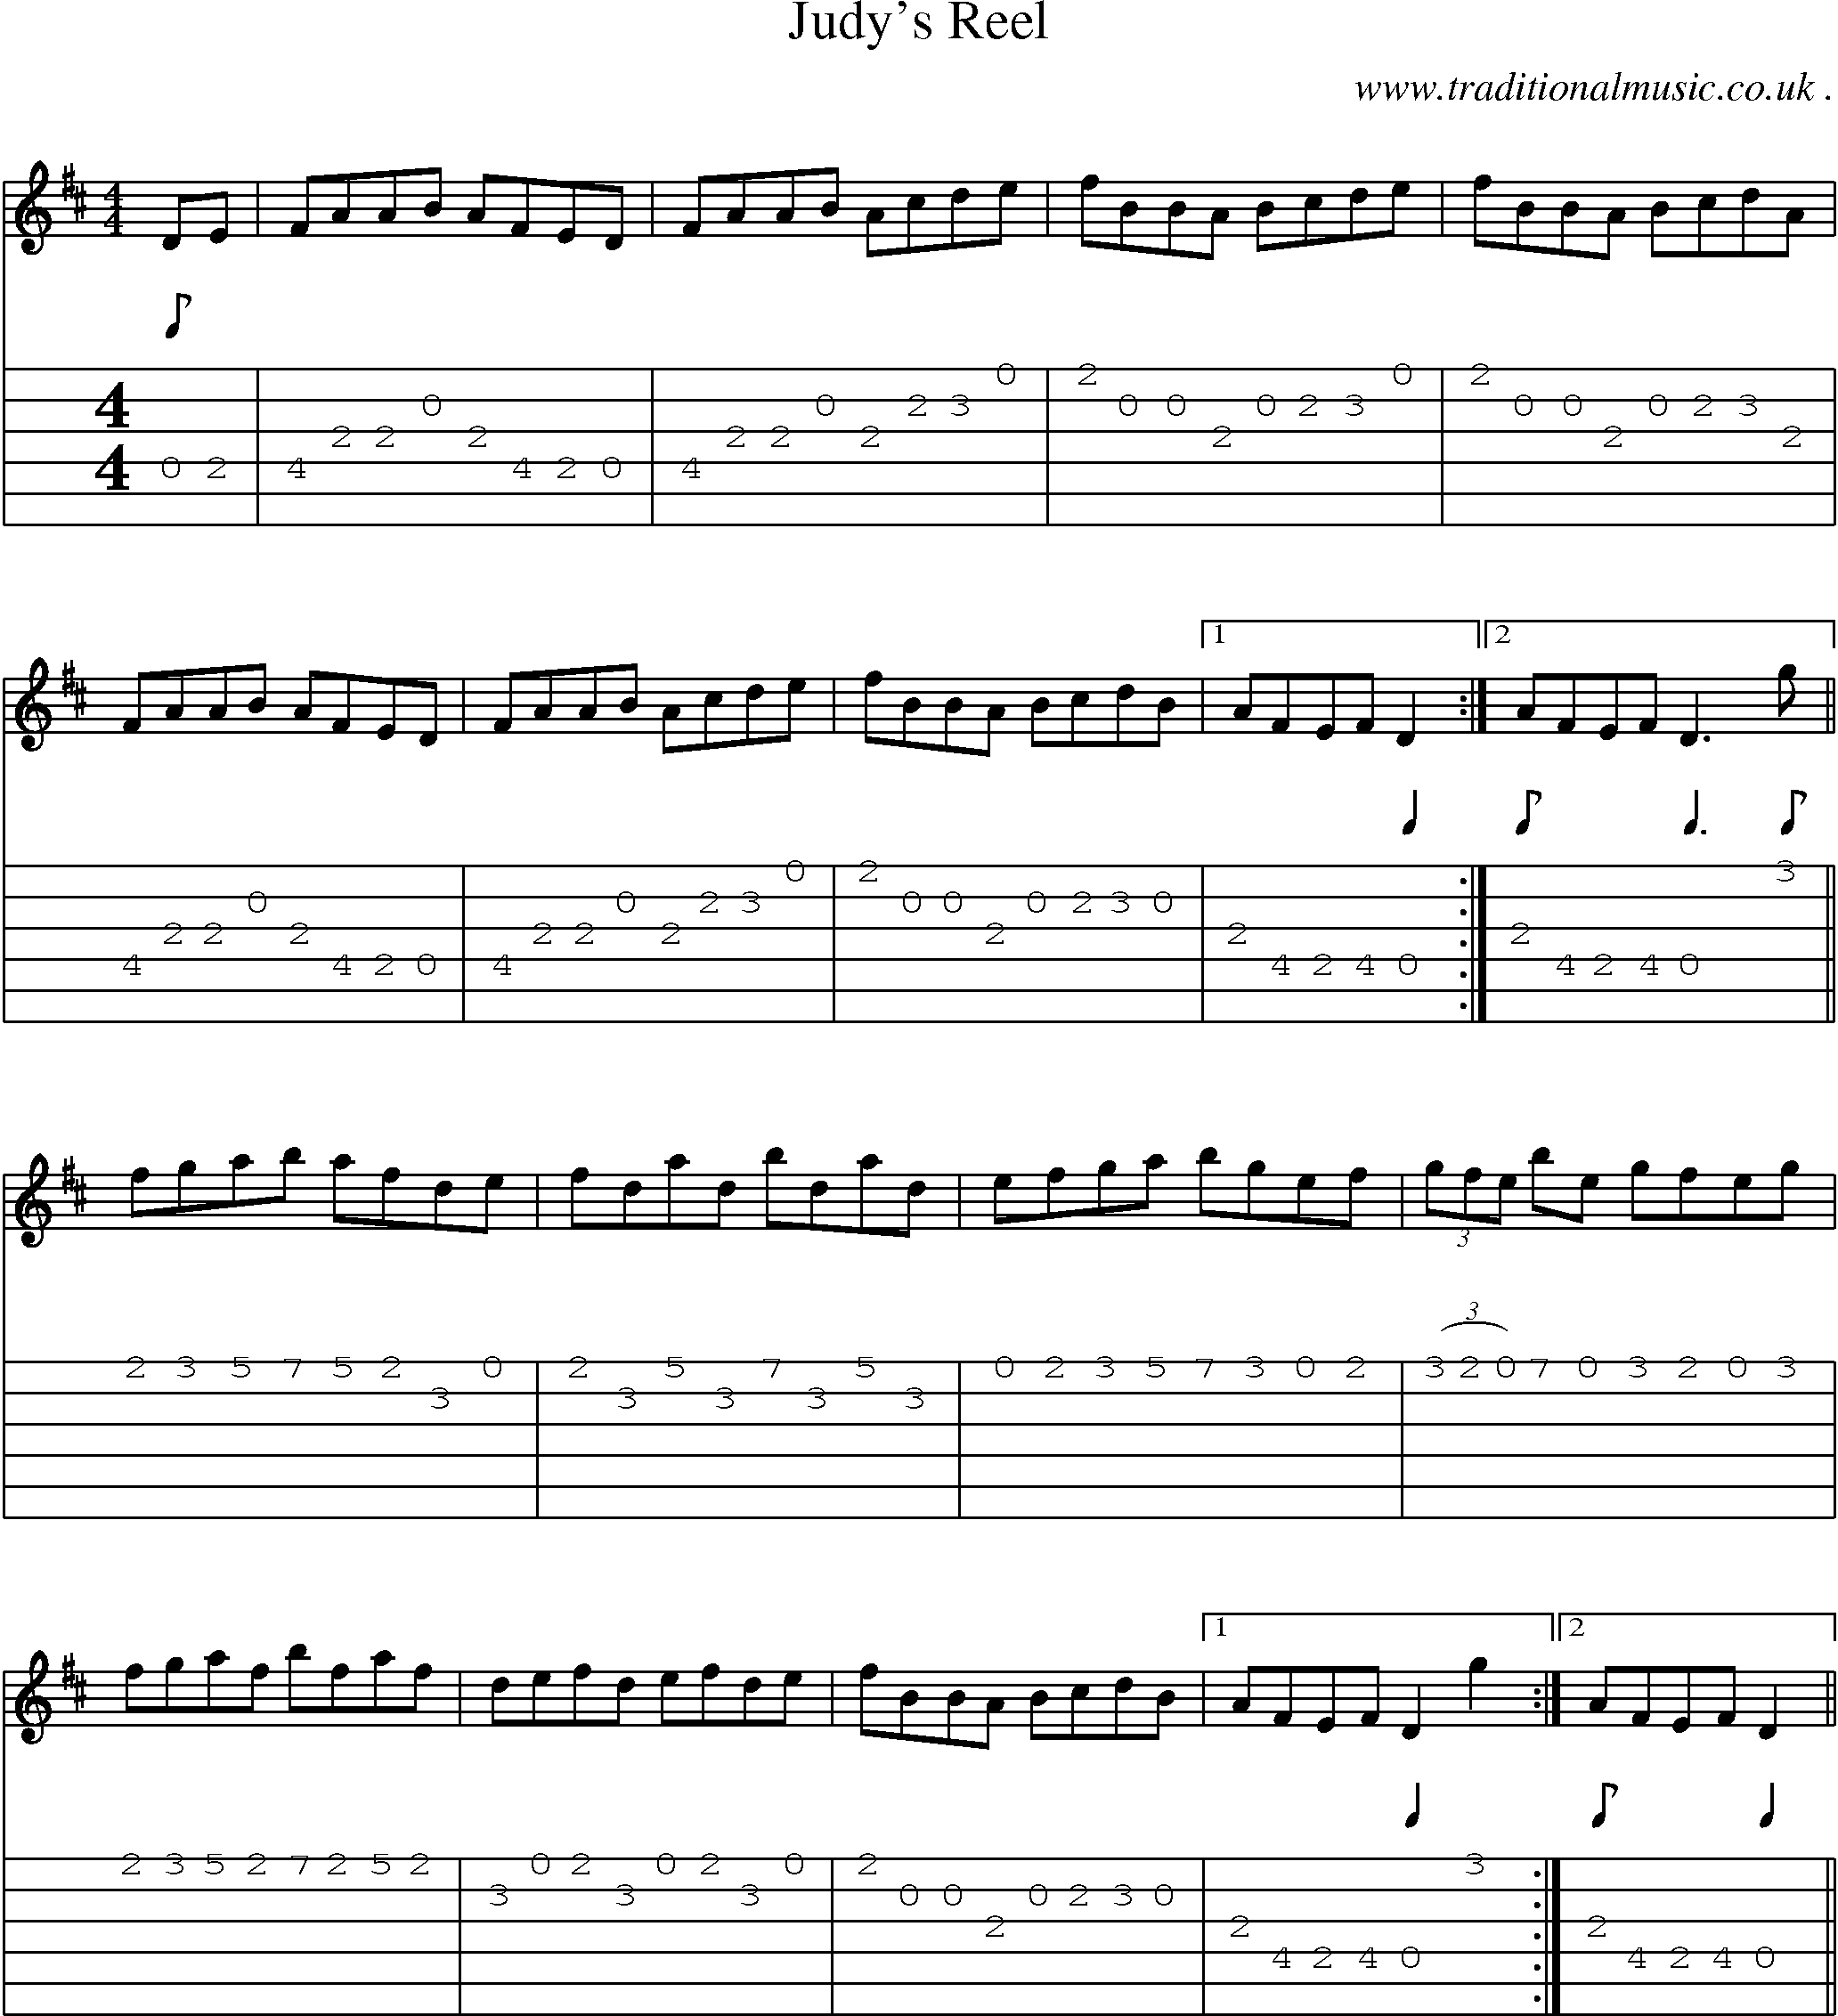 Sheet-Music and Guitar Tabs for Judys Reel